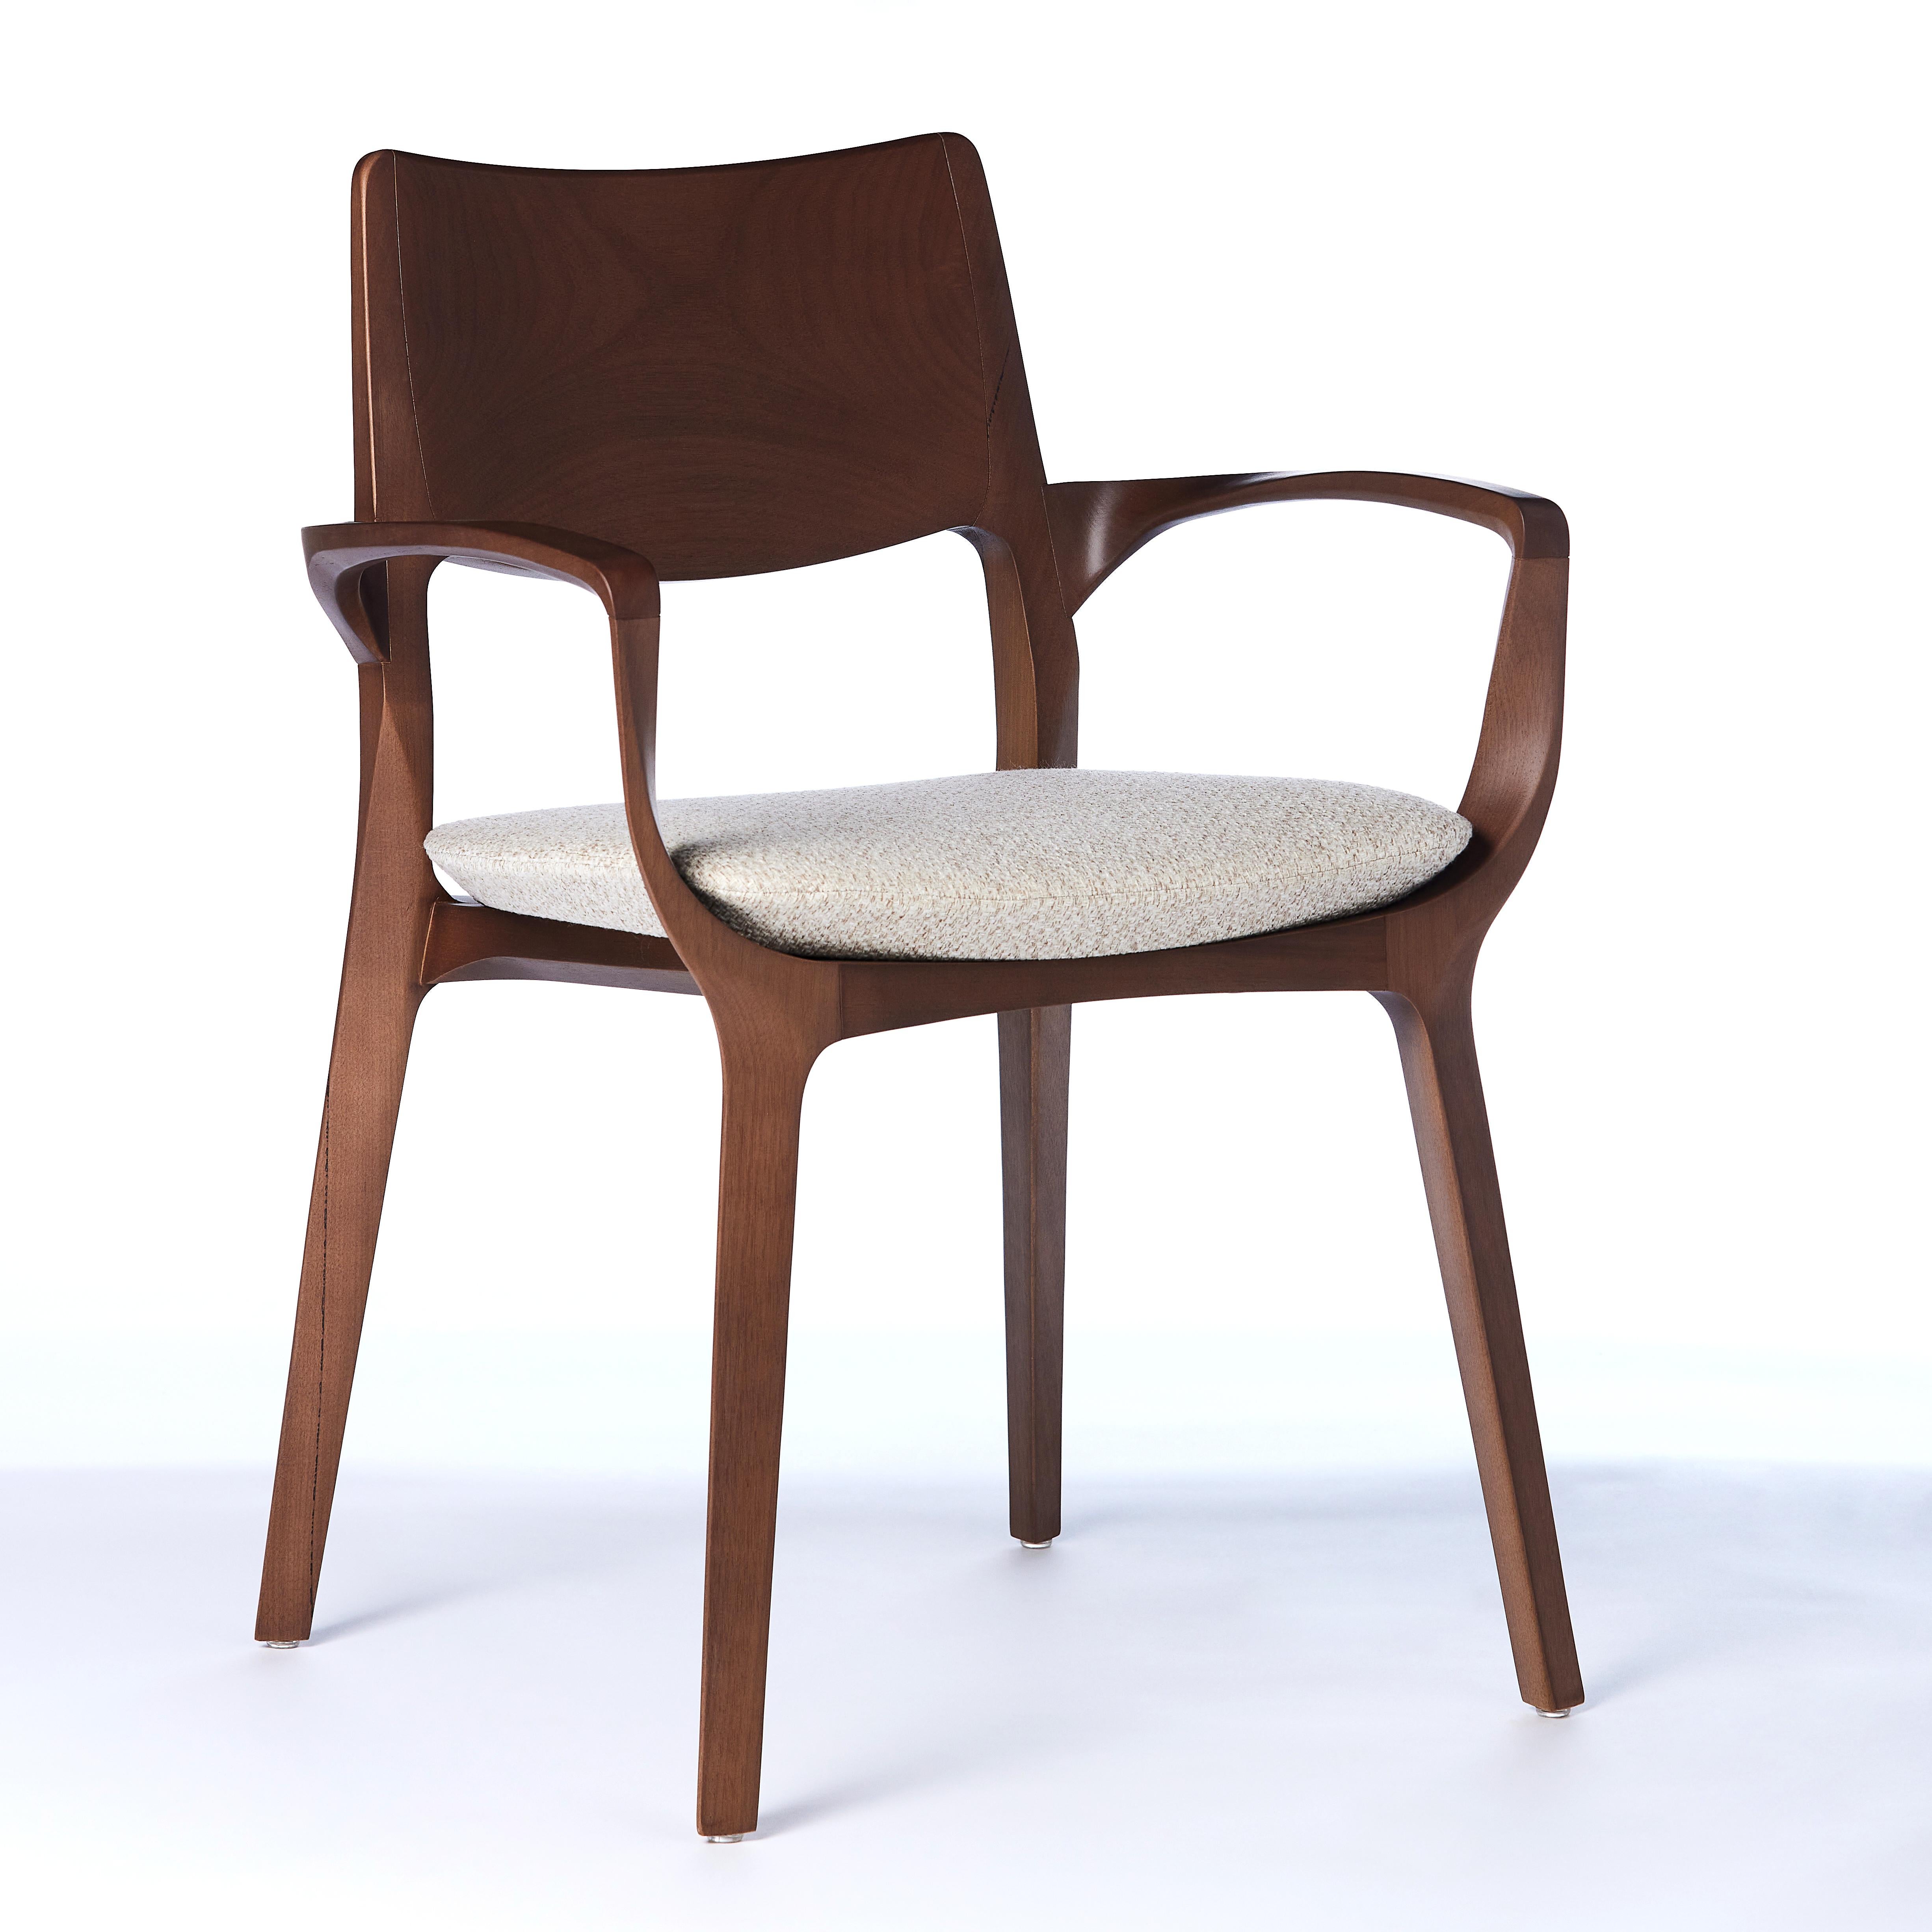 Modern Style Aurora Chair Sculpted in Walnut Finish Arms, leather back & seating For Sale 8